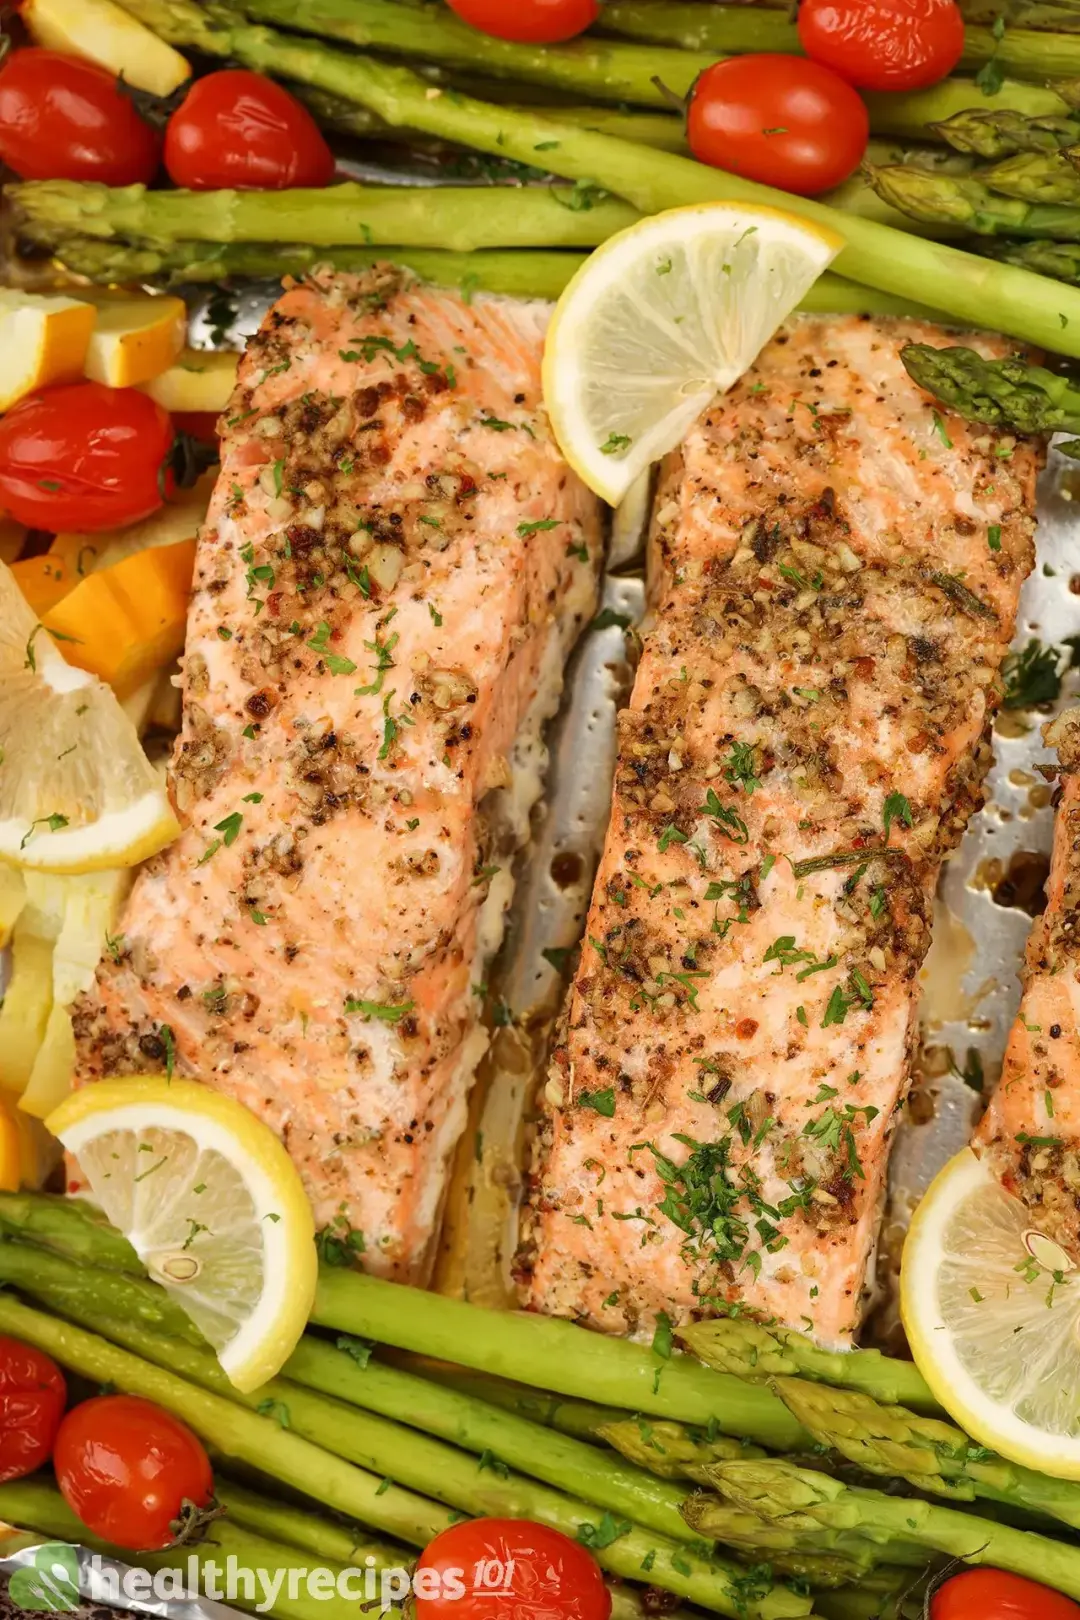 A close-up picture of baked salmon fillets, cherry tomatoes, asparagus, zucchini, and lemon slices on a baking tray taken from above